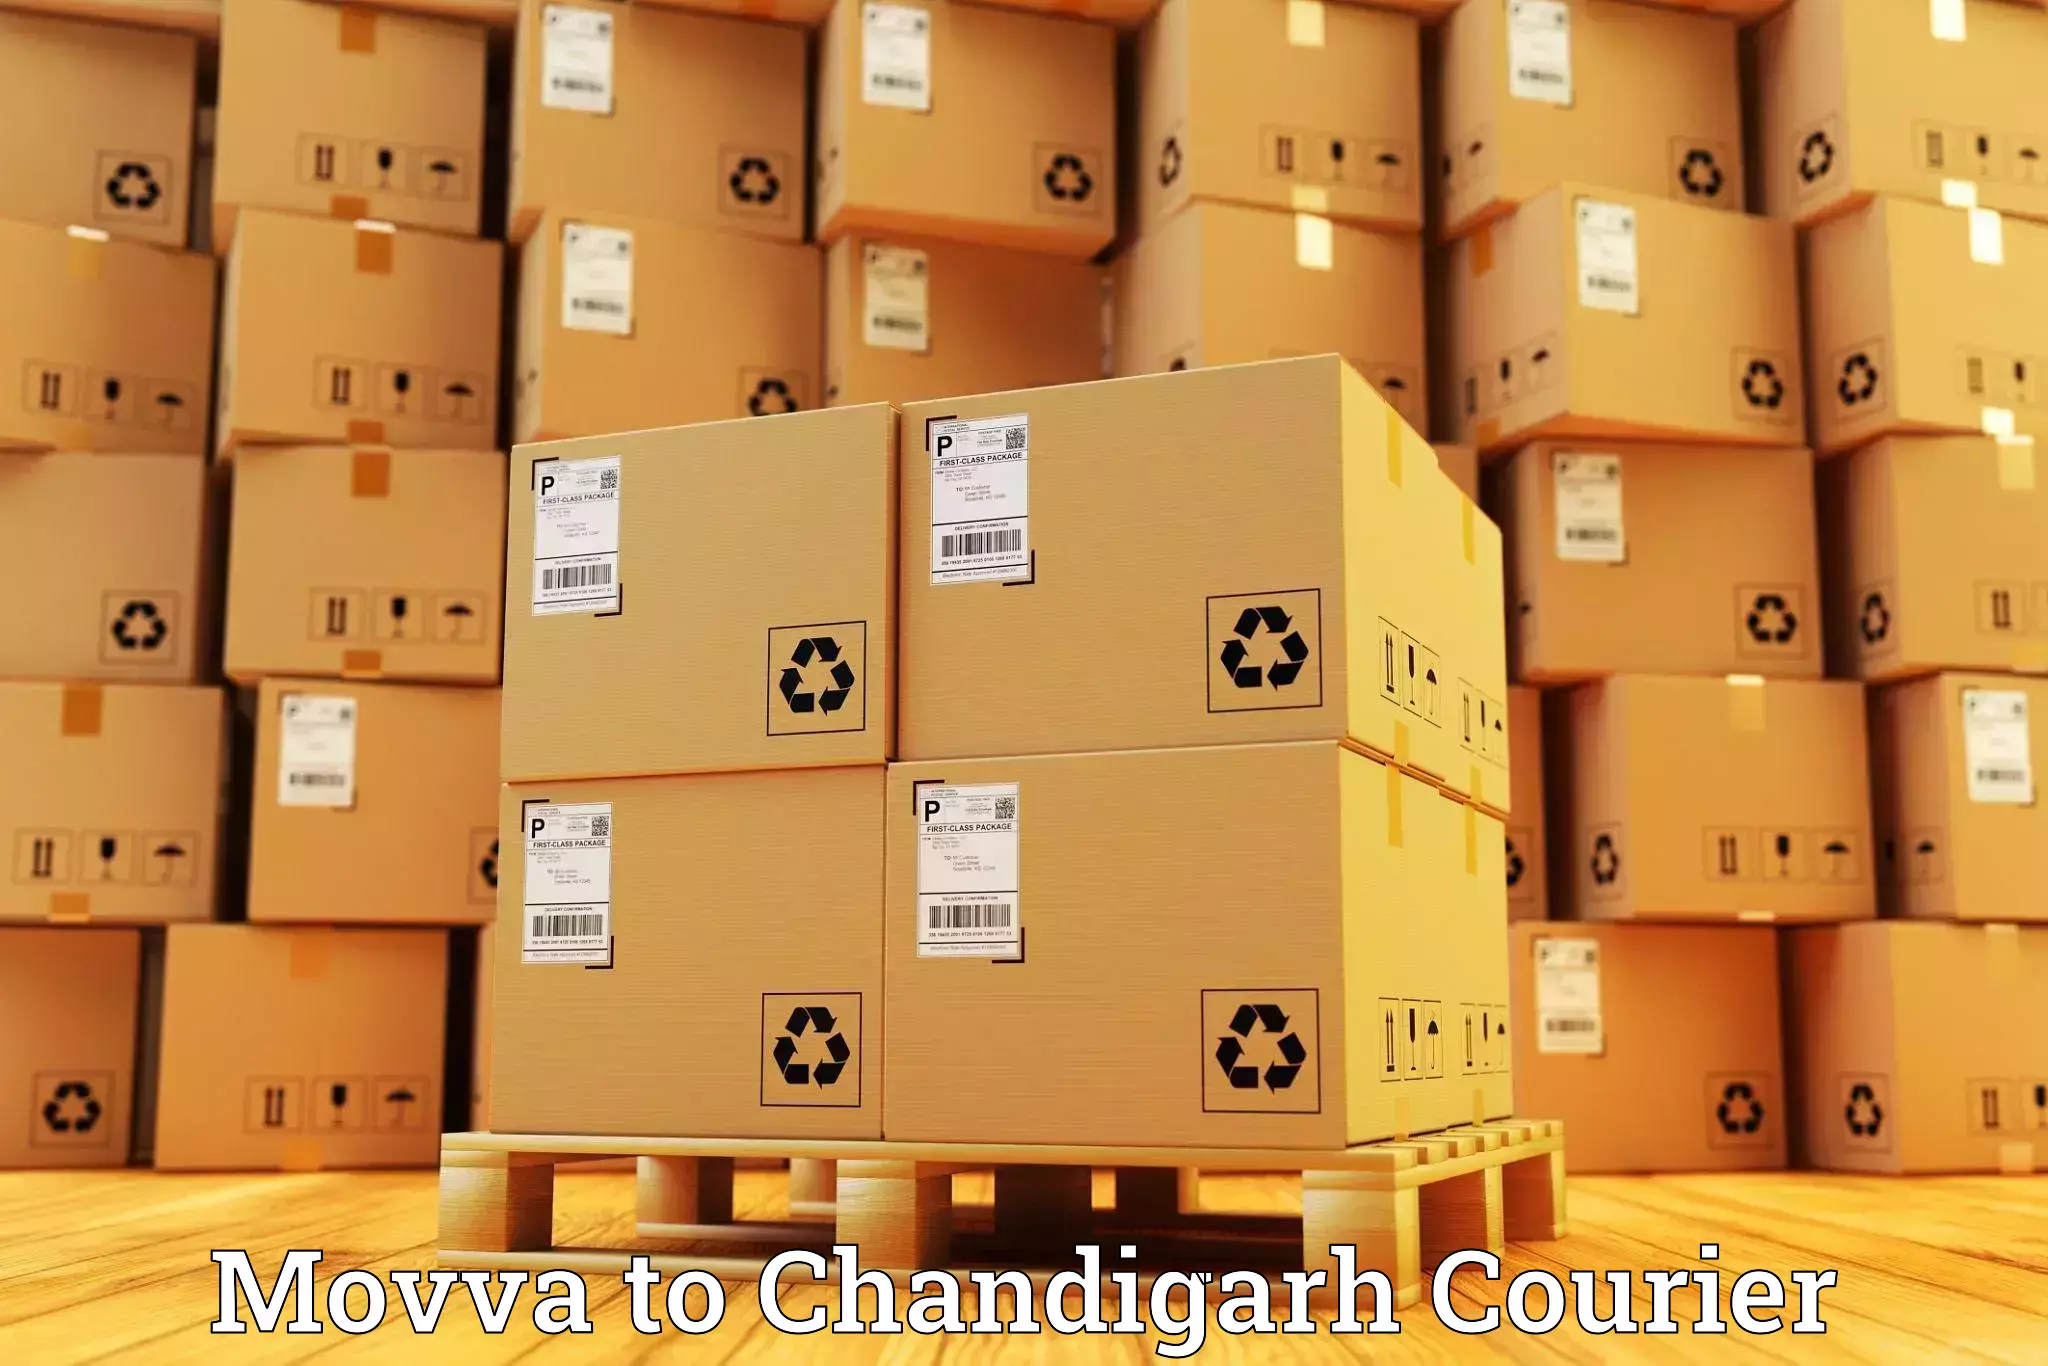 Cost-effective freight solutions Movva to Chandigarh